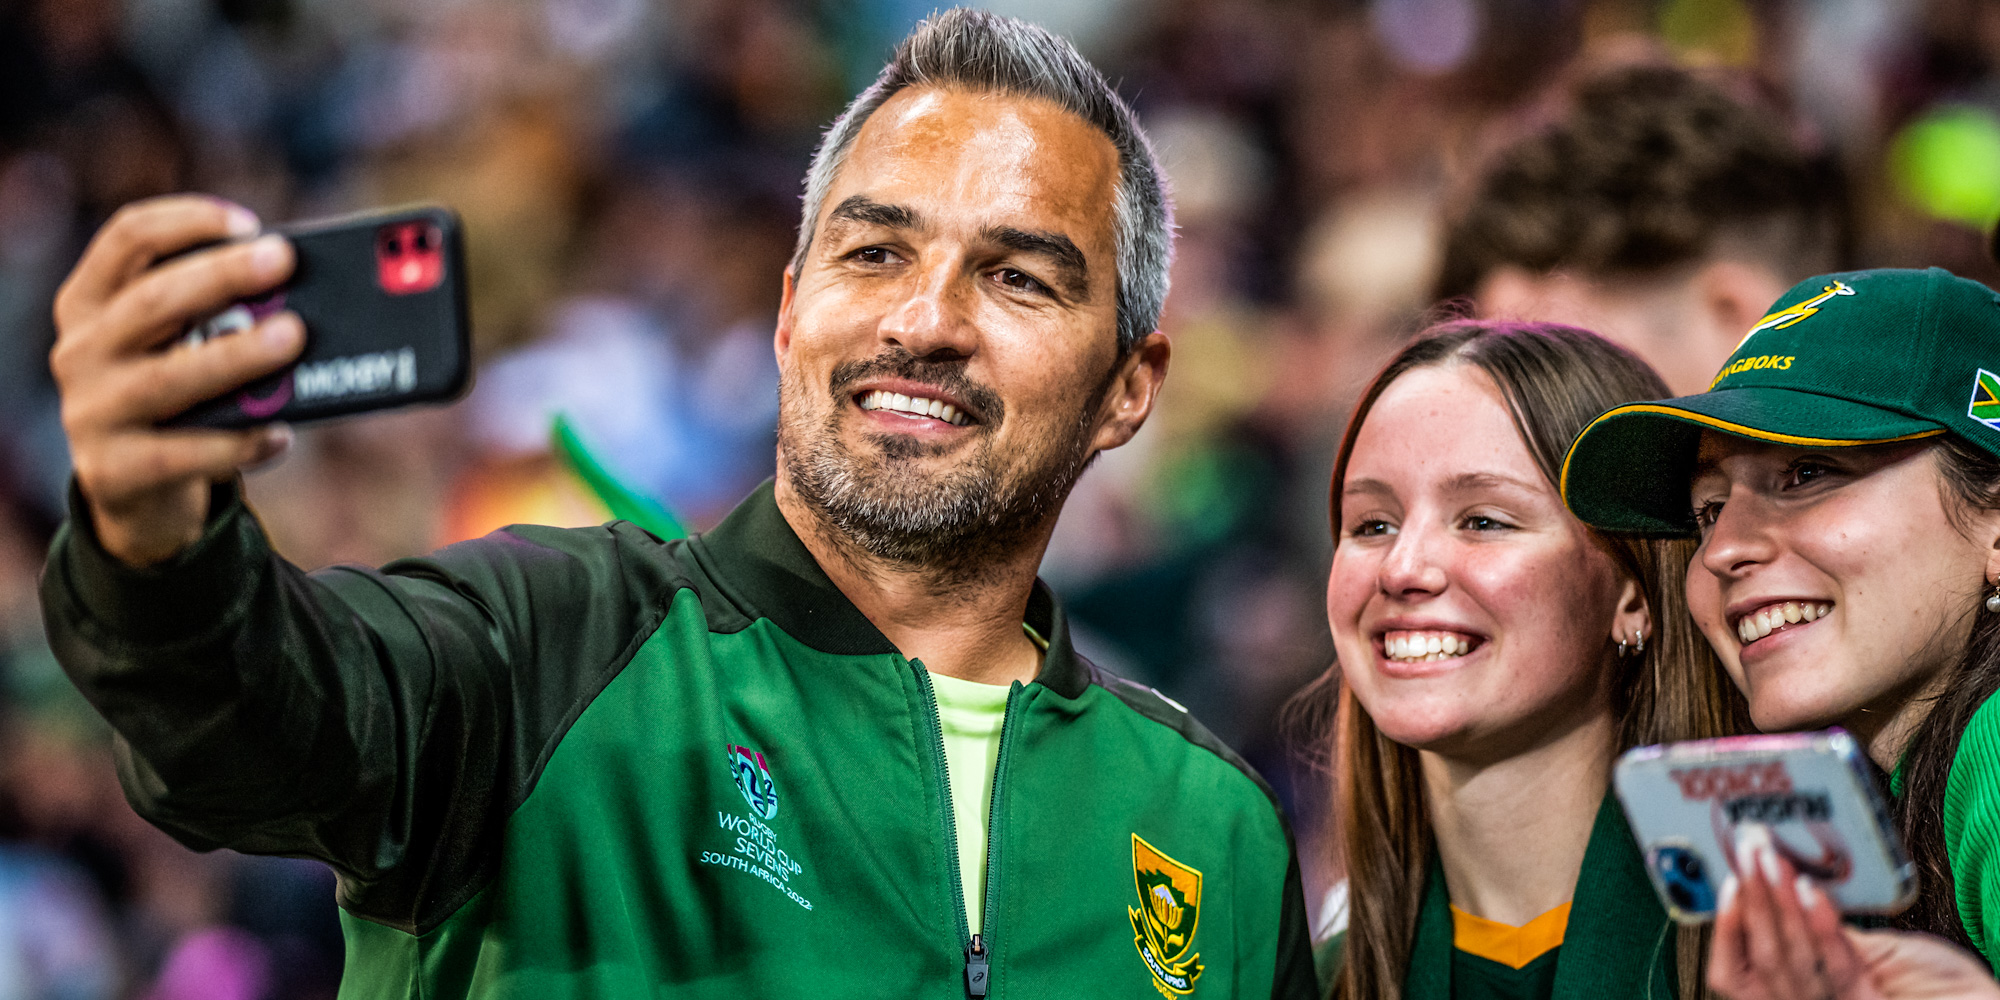 Neil Powell with some fans after the Blitzboks' RWC Sevens tournament came to an end with a great win over Samoa.